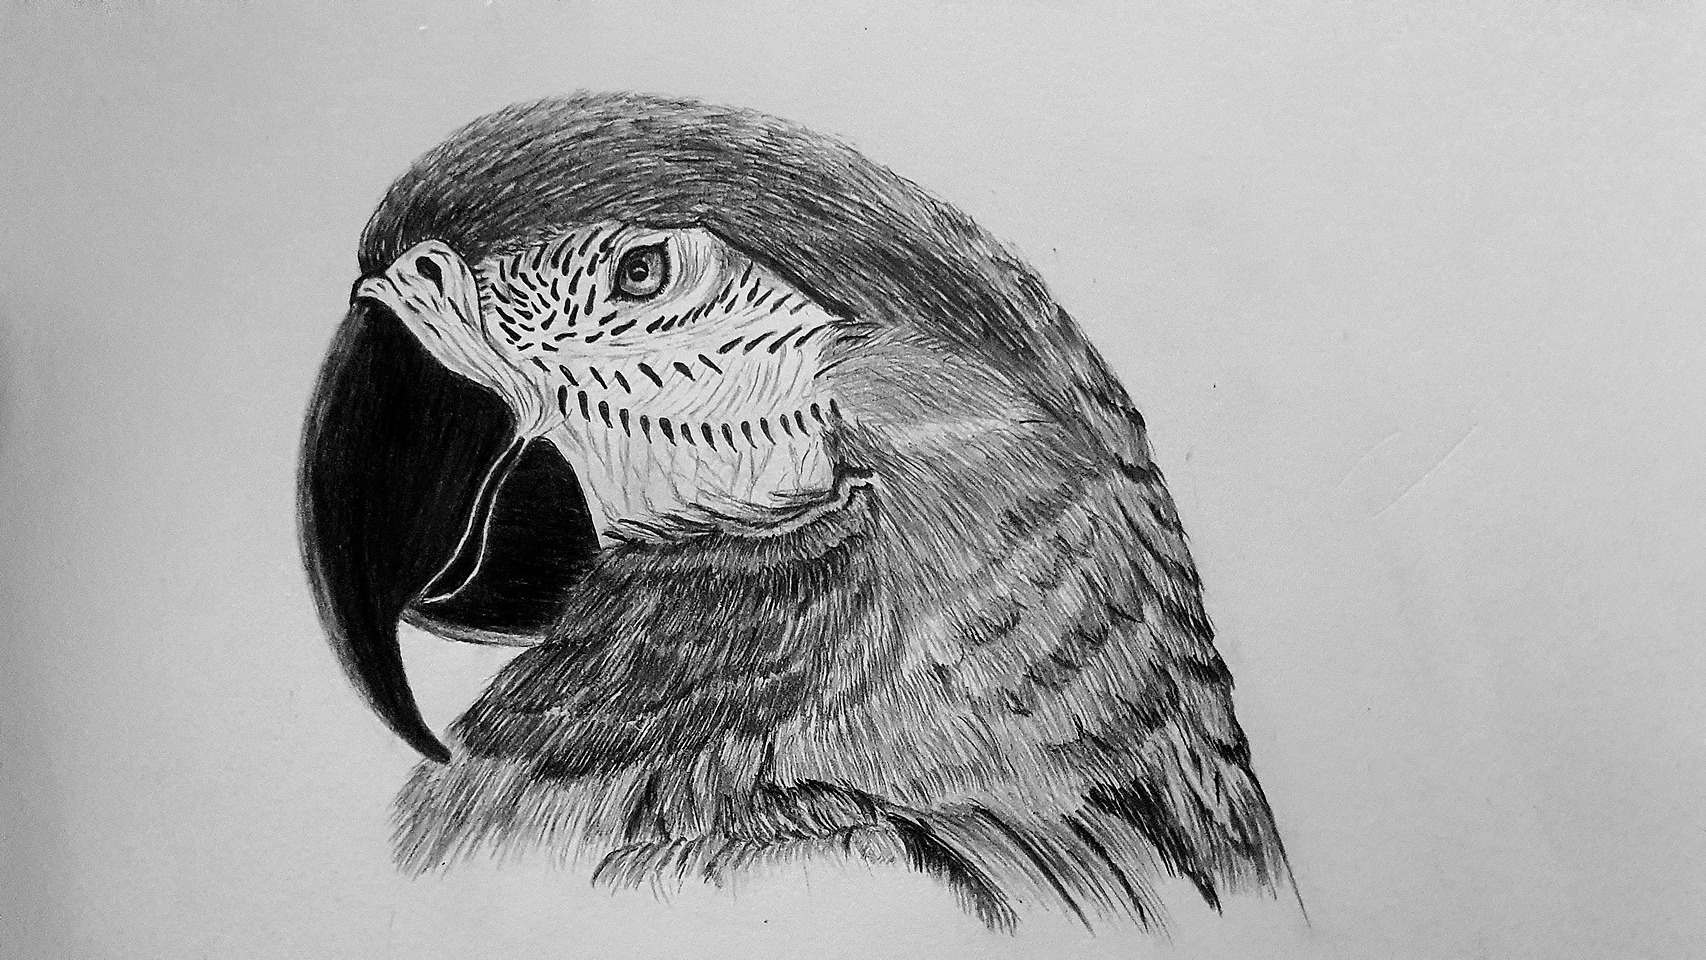 Flying Parrot pencil Drawing by rachelg33 on DeviantArt